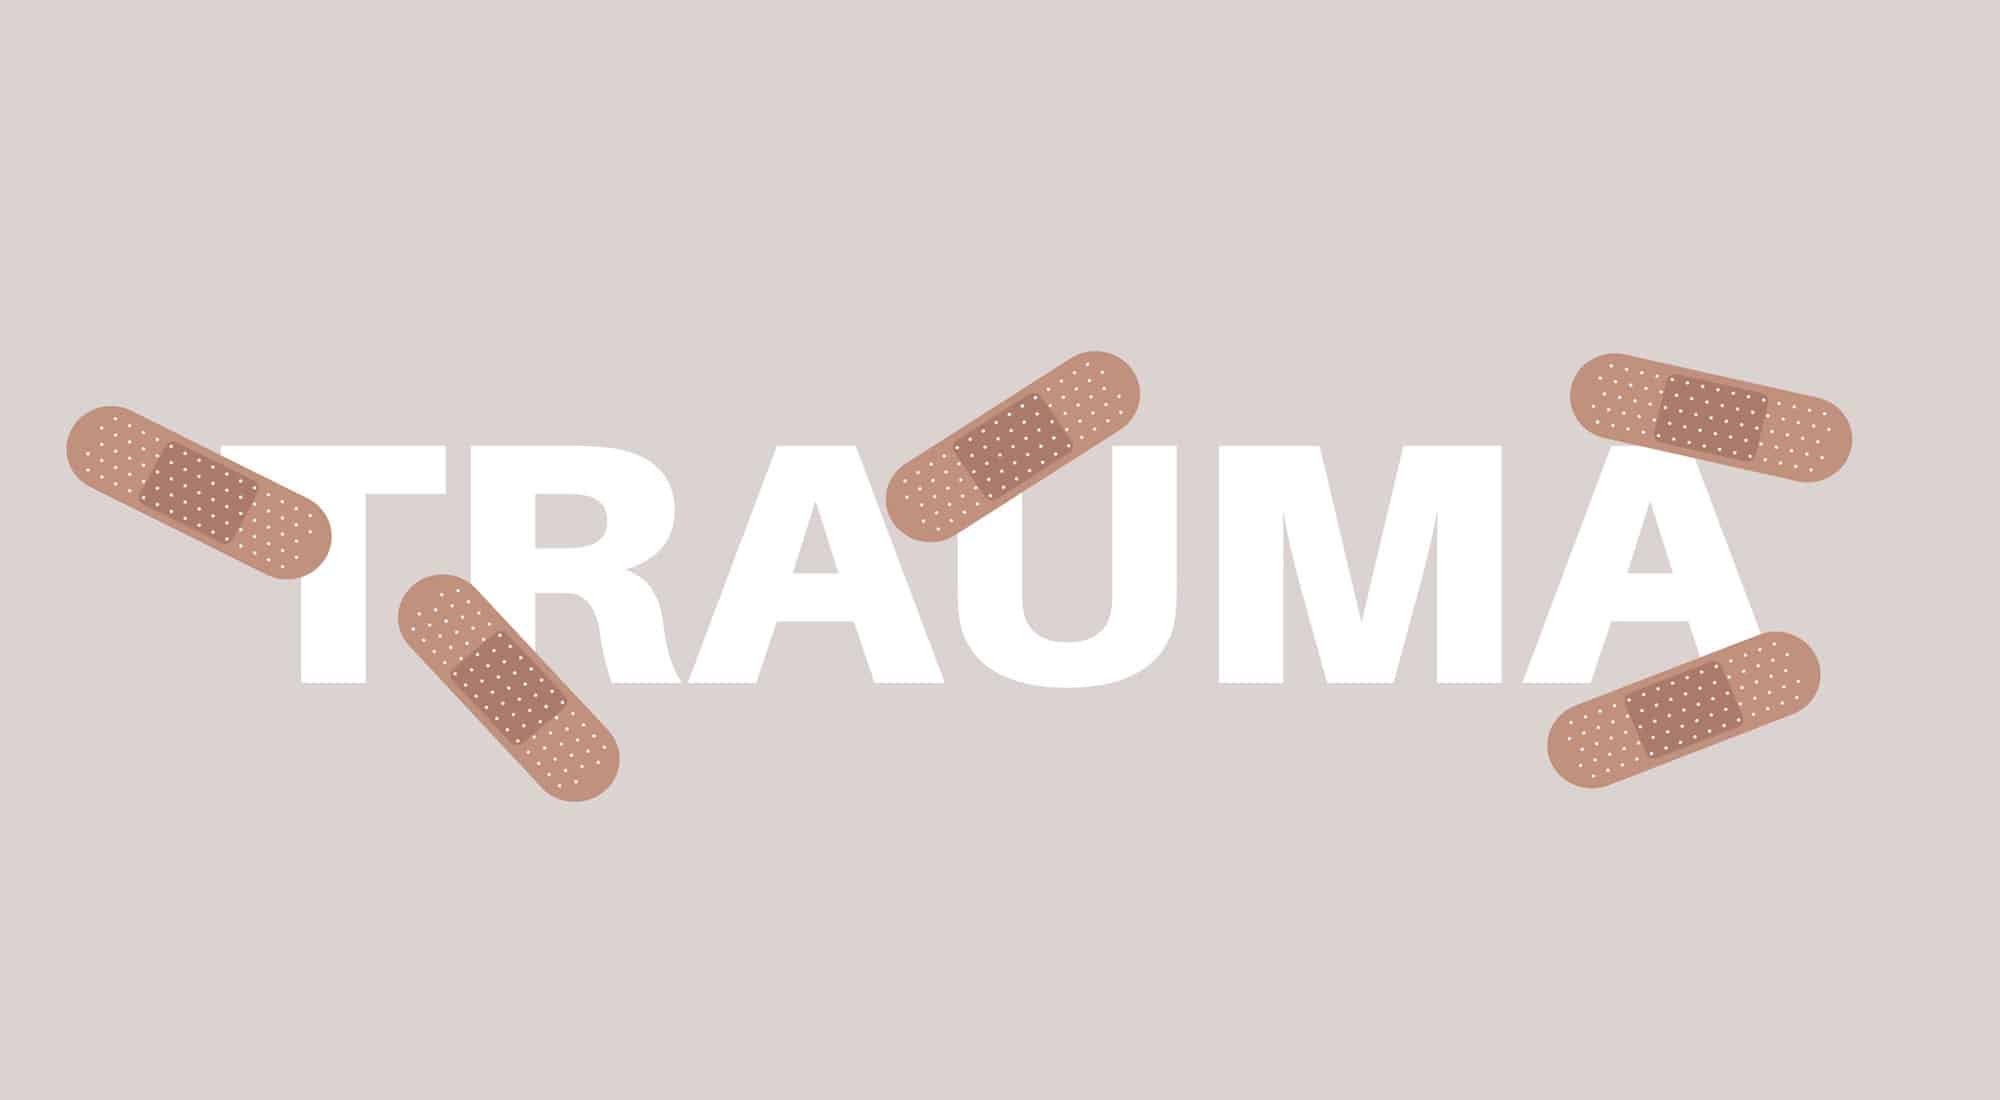 Trauma letters illustration with bandaids on top